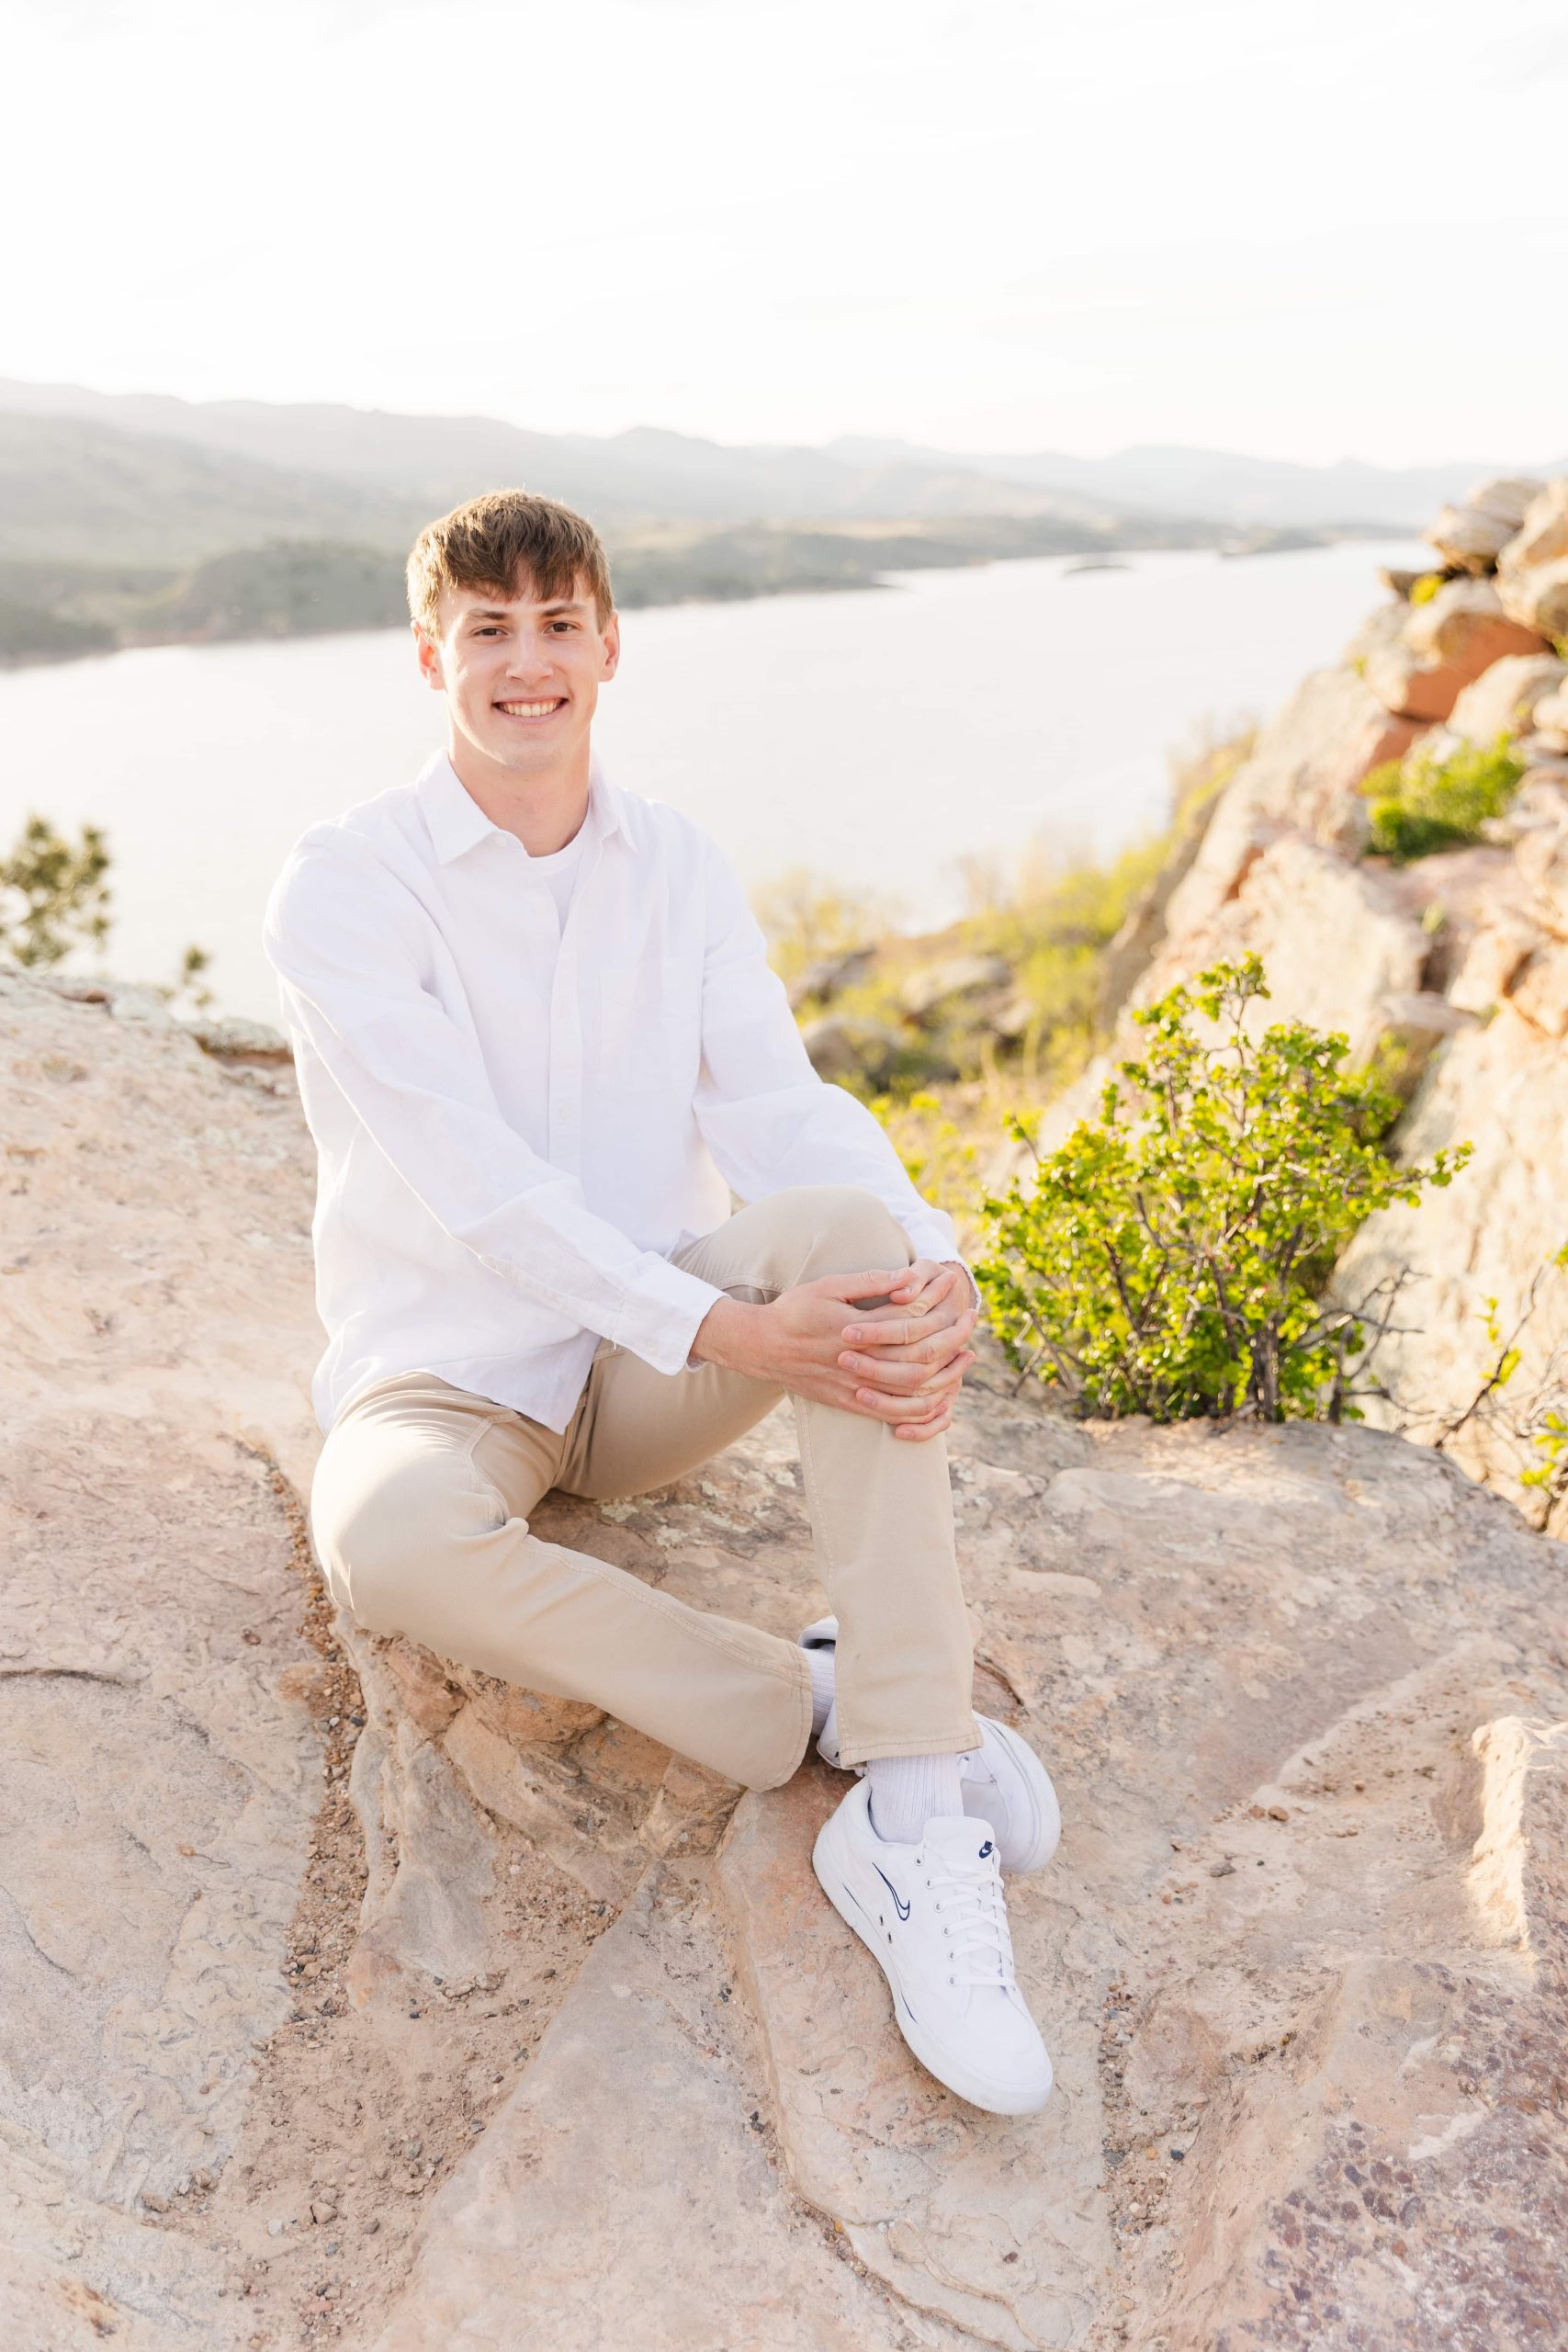 Justice Rees from Flat River Minerals, sitting on top of a rock with a scenic lake view in the background